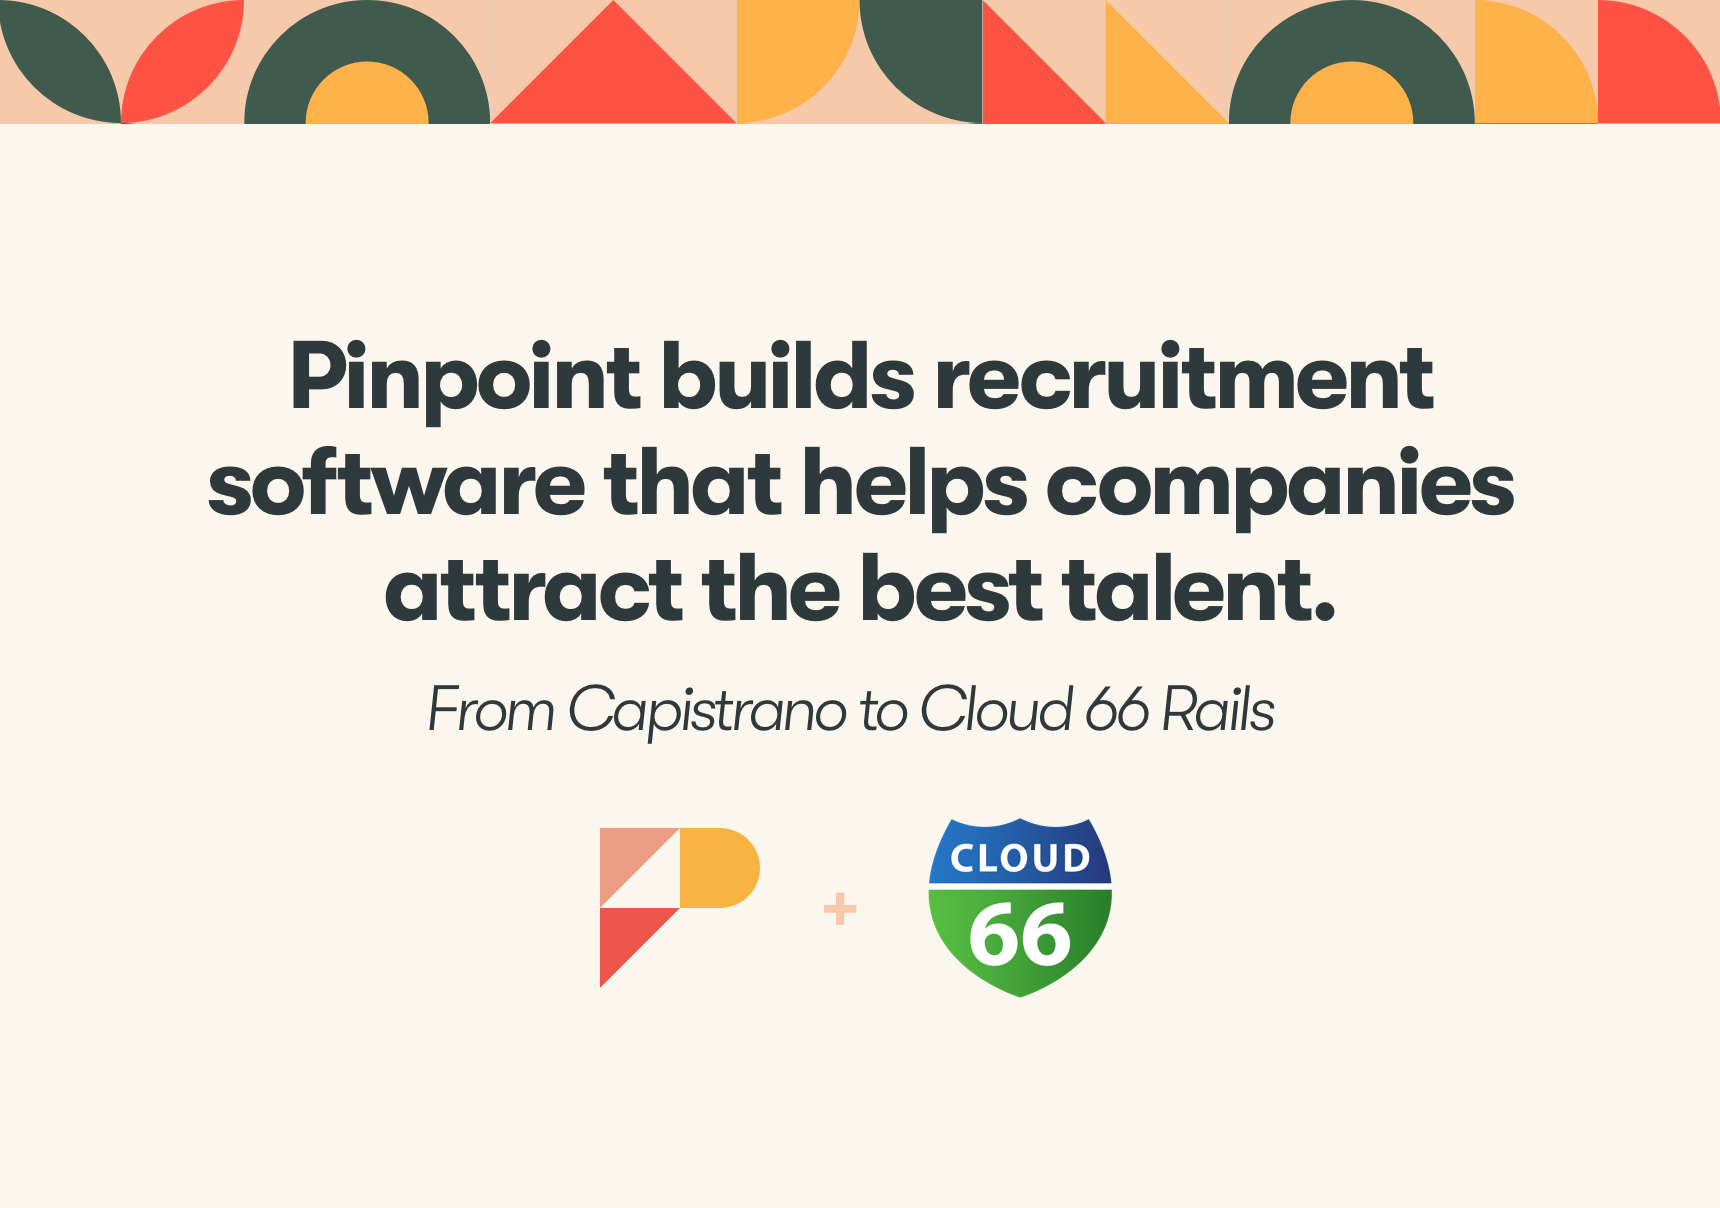 pinpoint-builds-recruitment-software-that-helps-companies-attract-the-best-talent-from-capistrano-to-cloud-66-rails